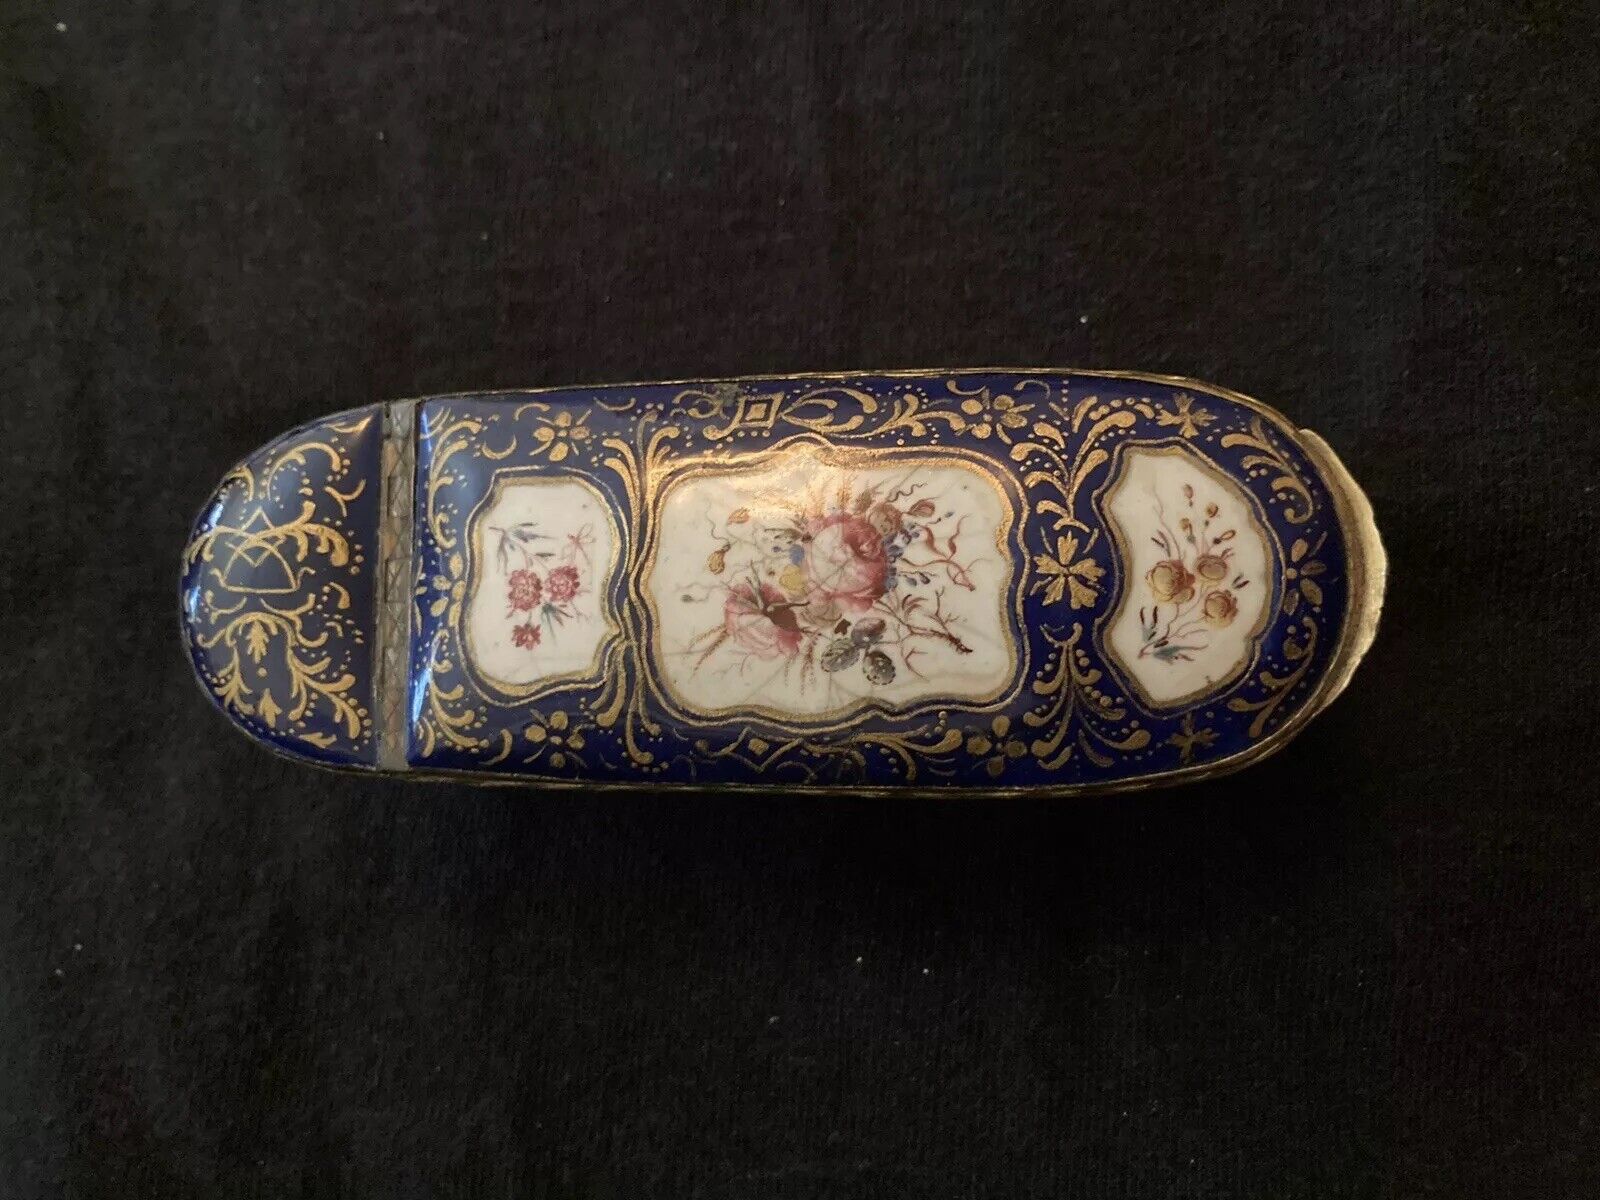 Rare And Large Late 18th c. Staffordshire Enamel Snuff Box